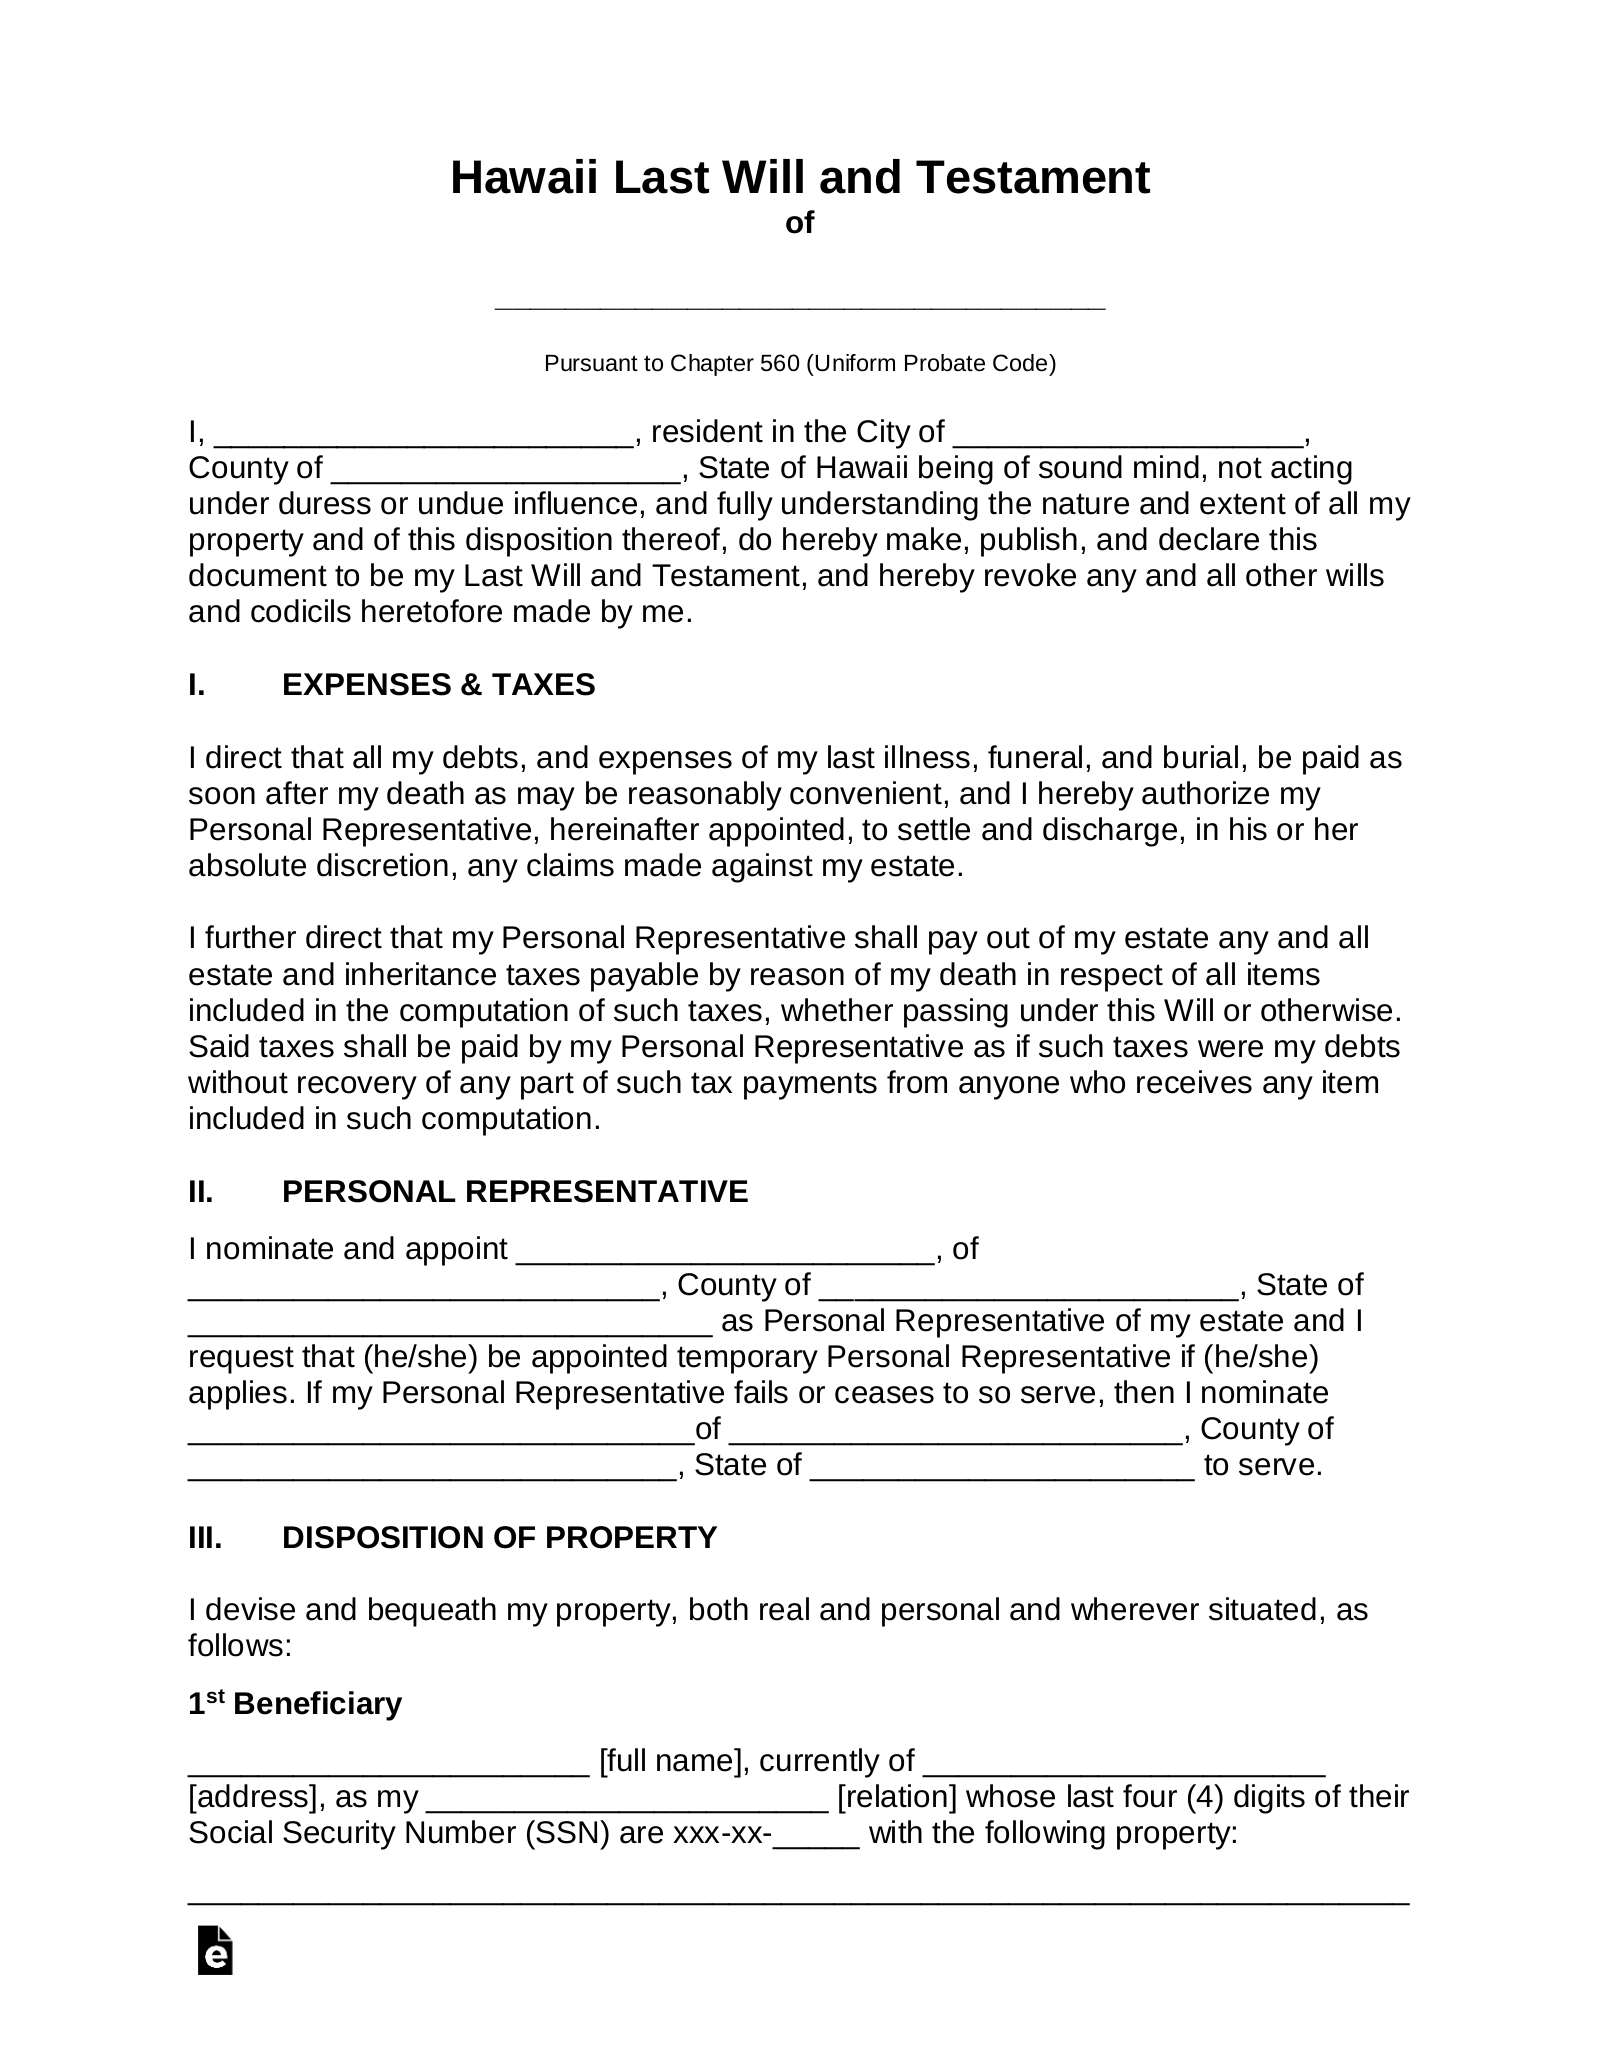 Hawaii Last Will and Testament Template